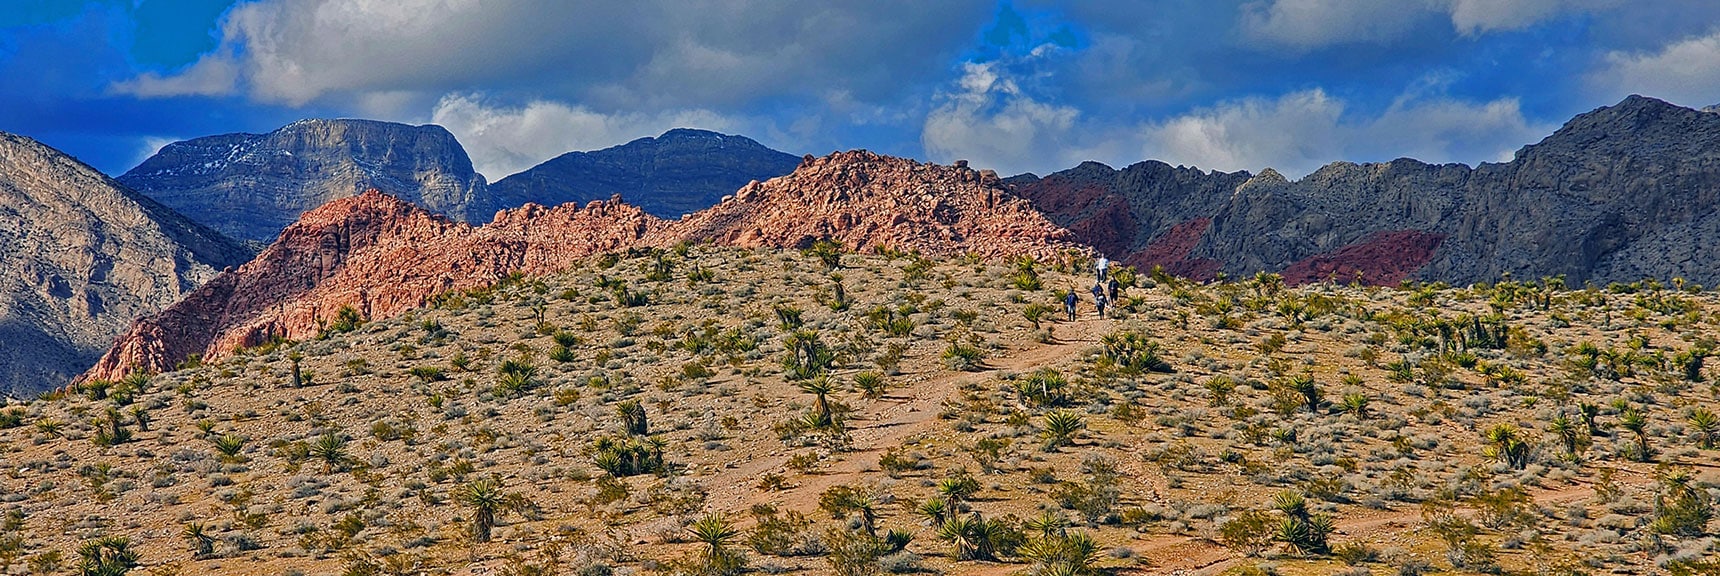 Hikers on Gene's Trail Toward Kraft Mt. and Gateway Canyon | Calico Basin Daily Workout Trails | Calico Basin, Nevada